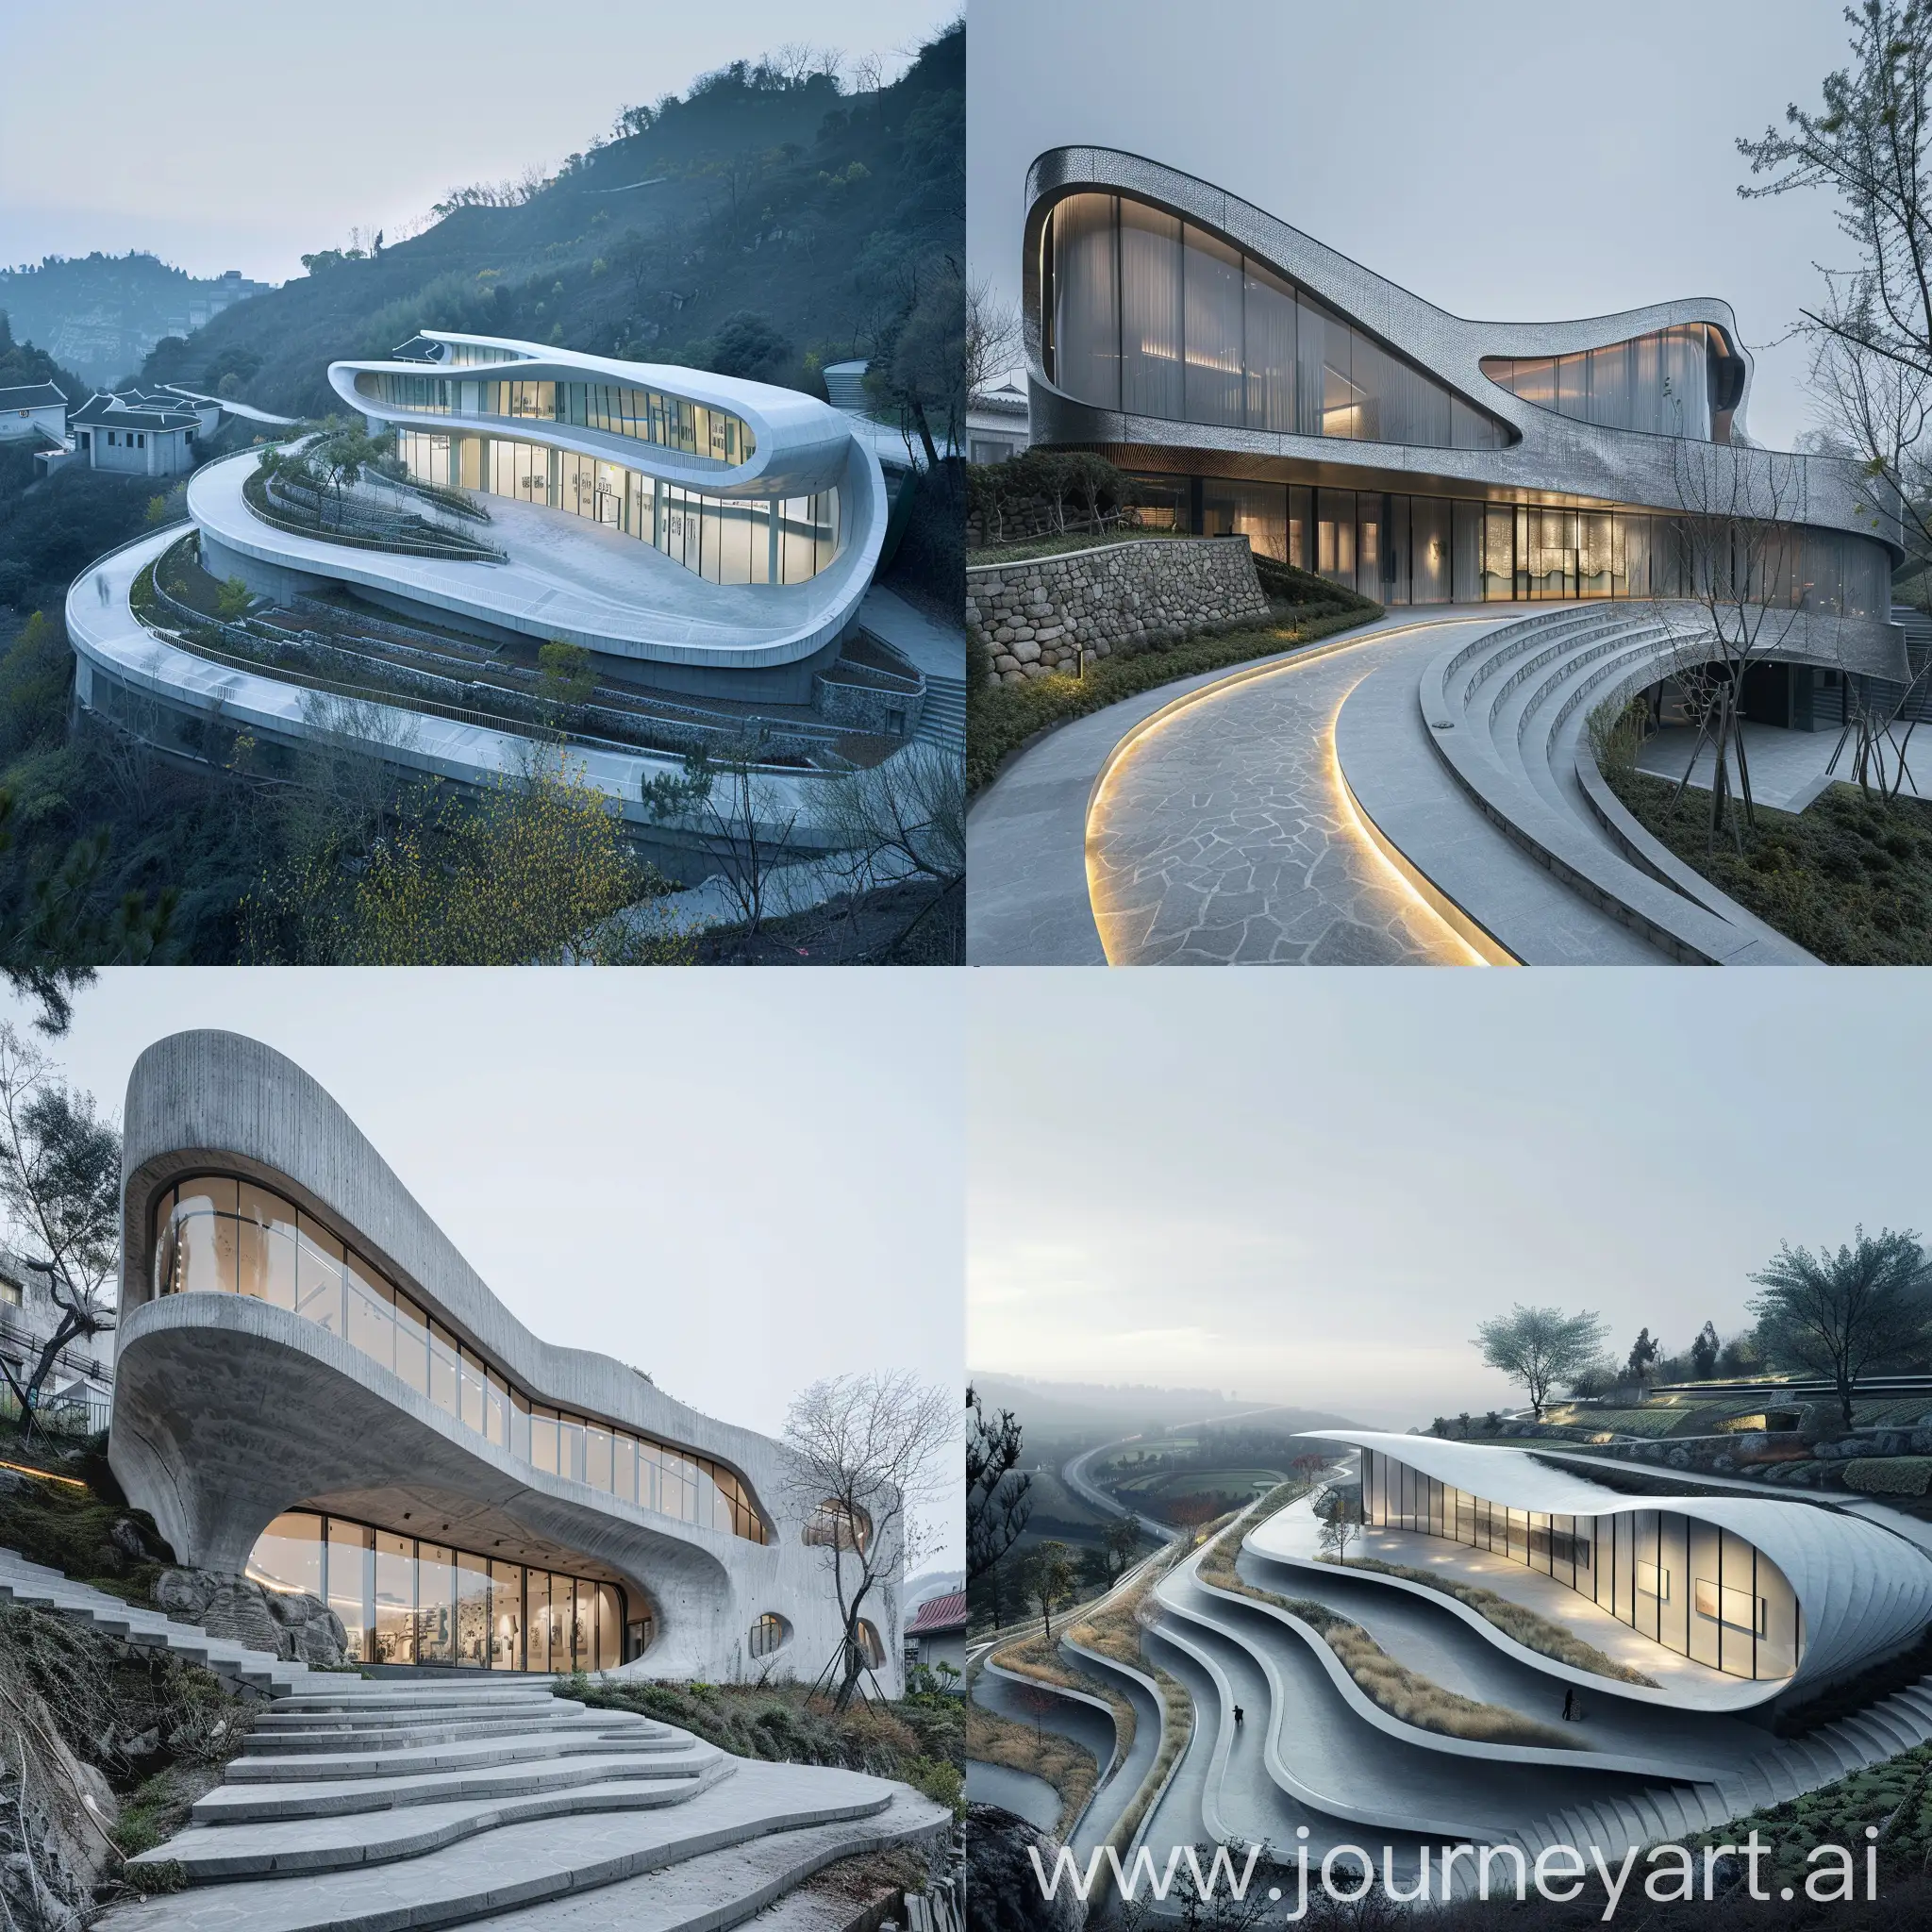 An exterior shot of a visual artist's gallery building located on a terraced terrain, and the gallery is a curved mass